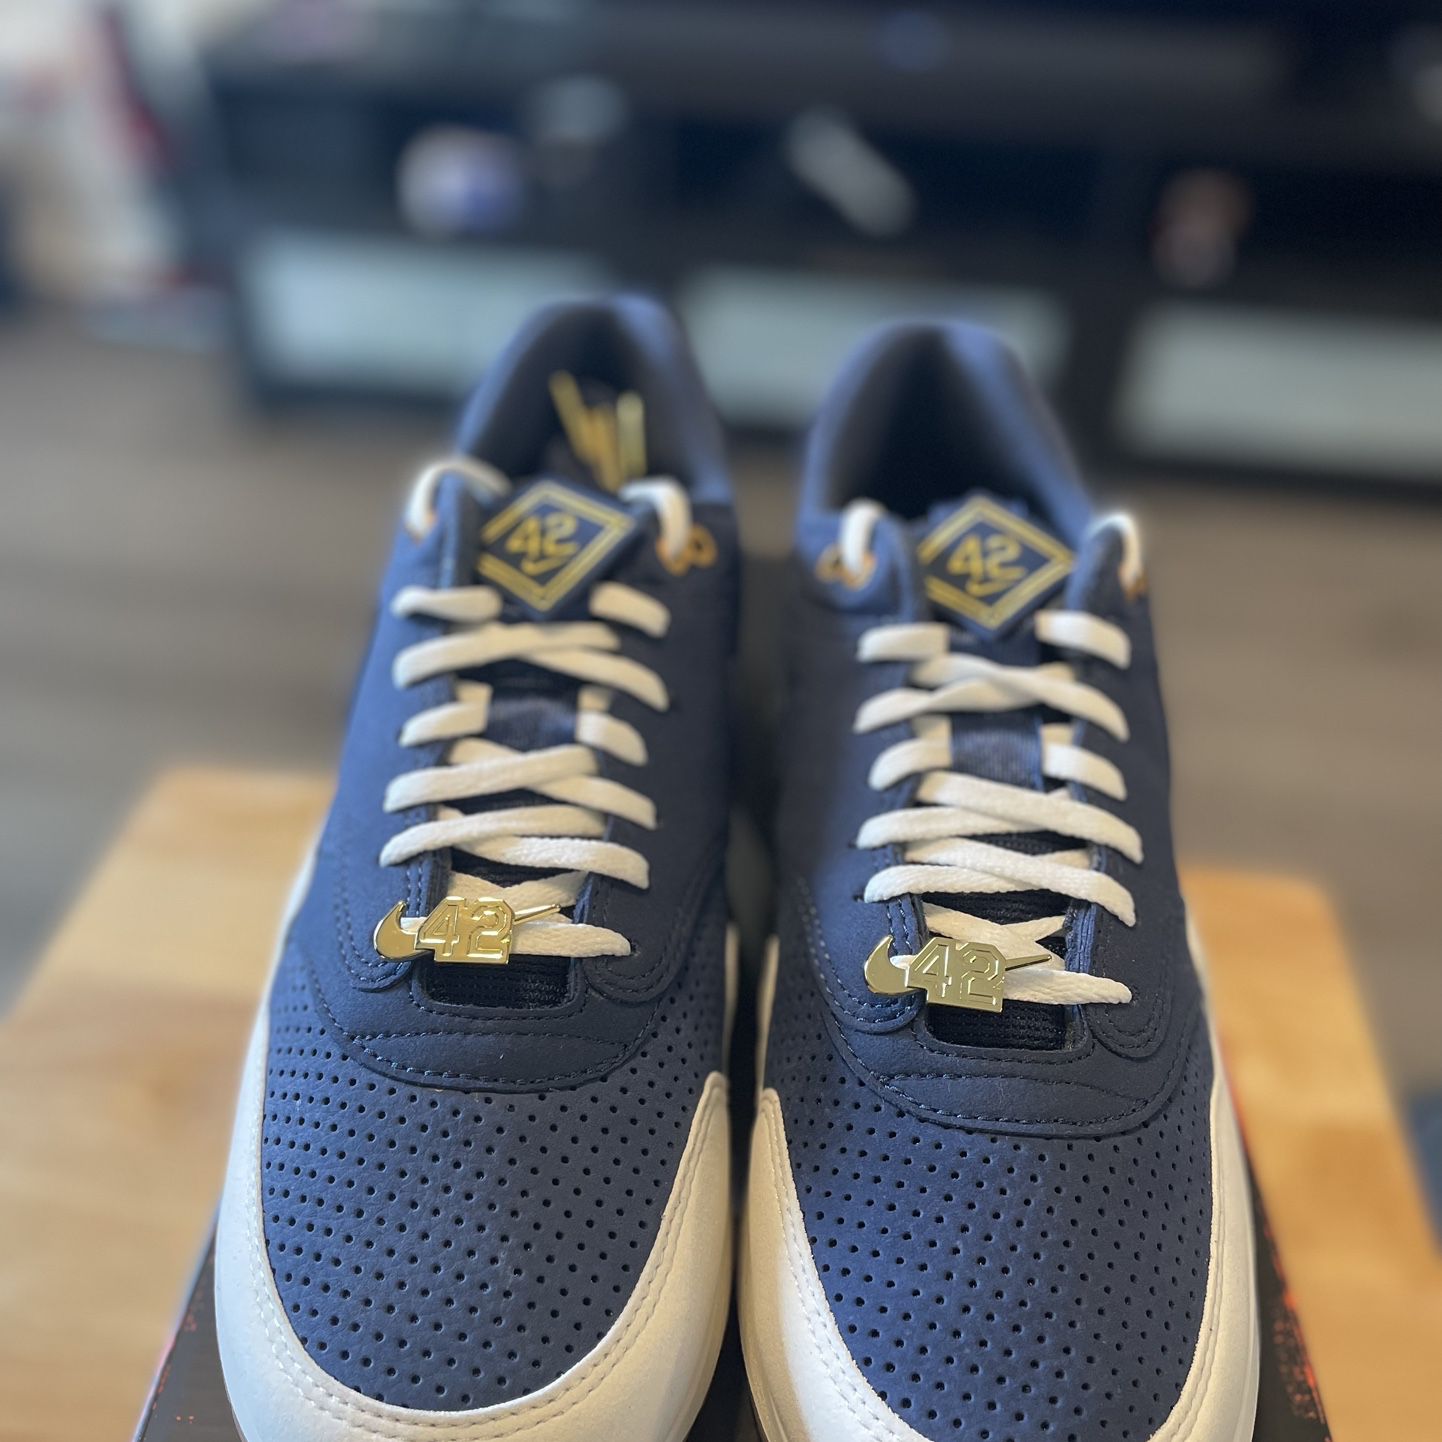 Nike Air Max ‘86 Jackie Robinson New Size 12 With Proof Of Purchase 🧾 $315